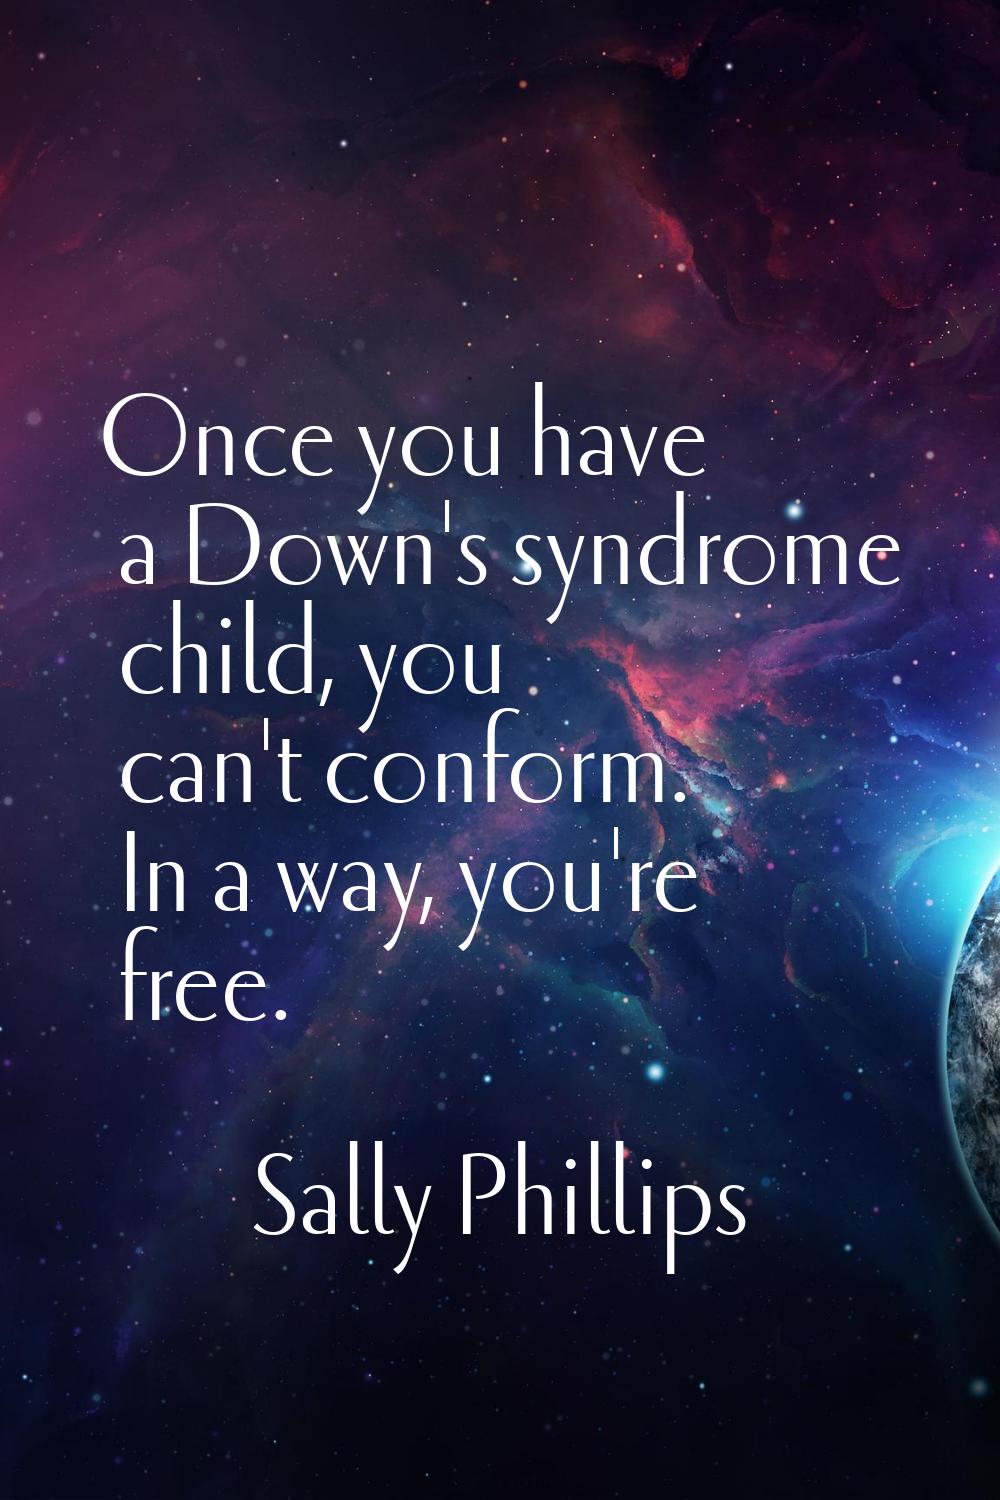 Once you have a Down's syndrome child, you can't conform. In a way, you're free.